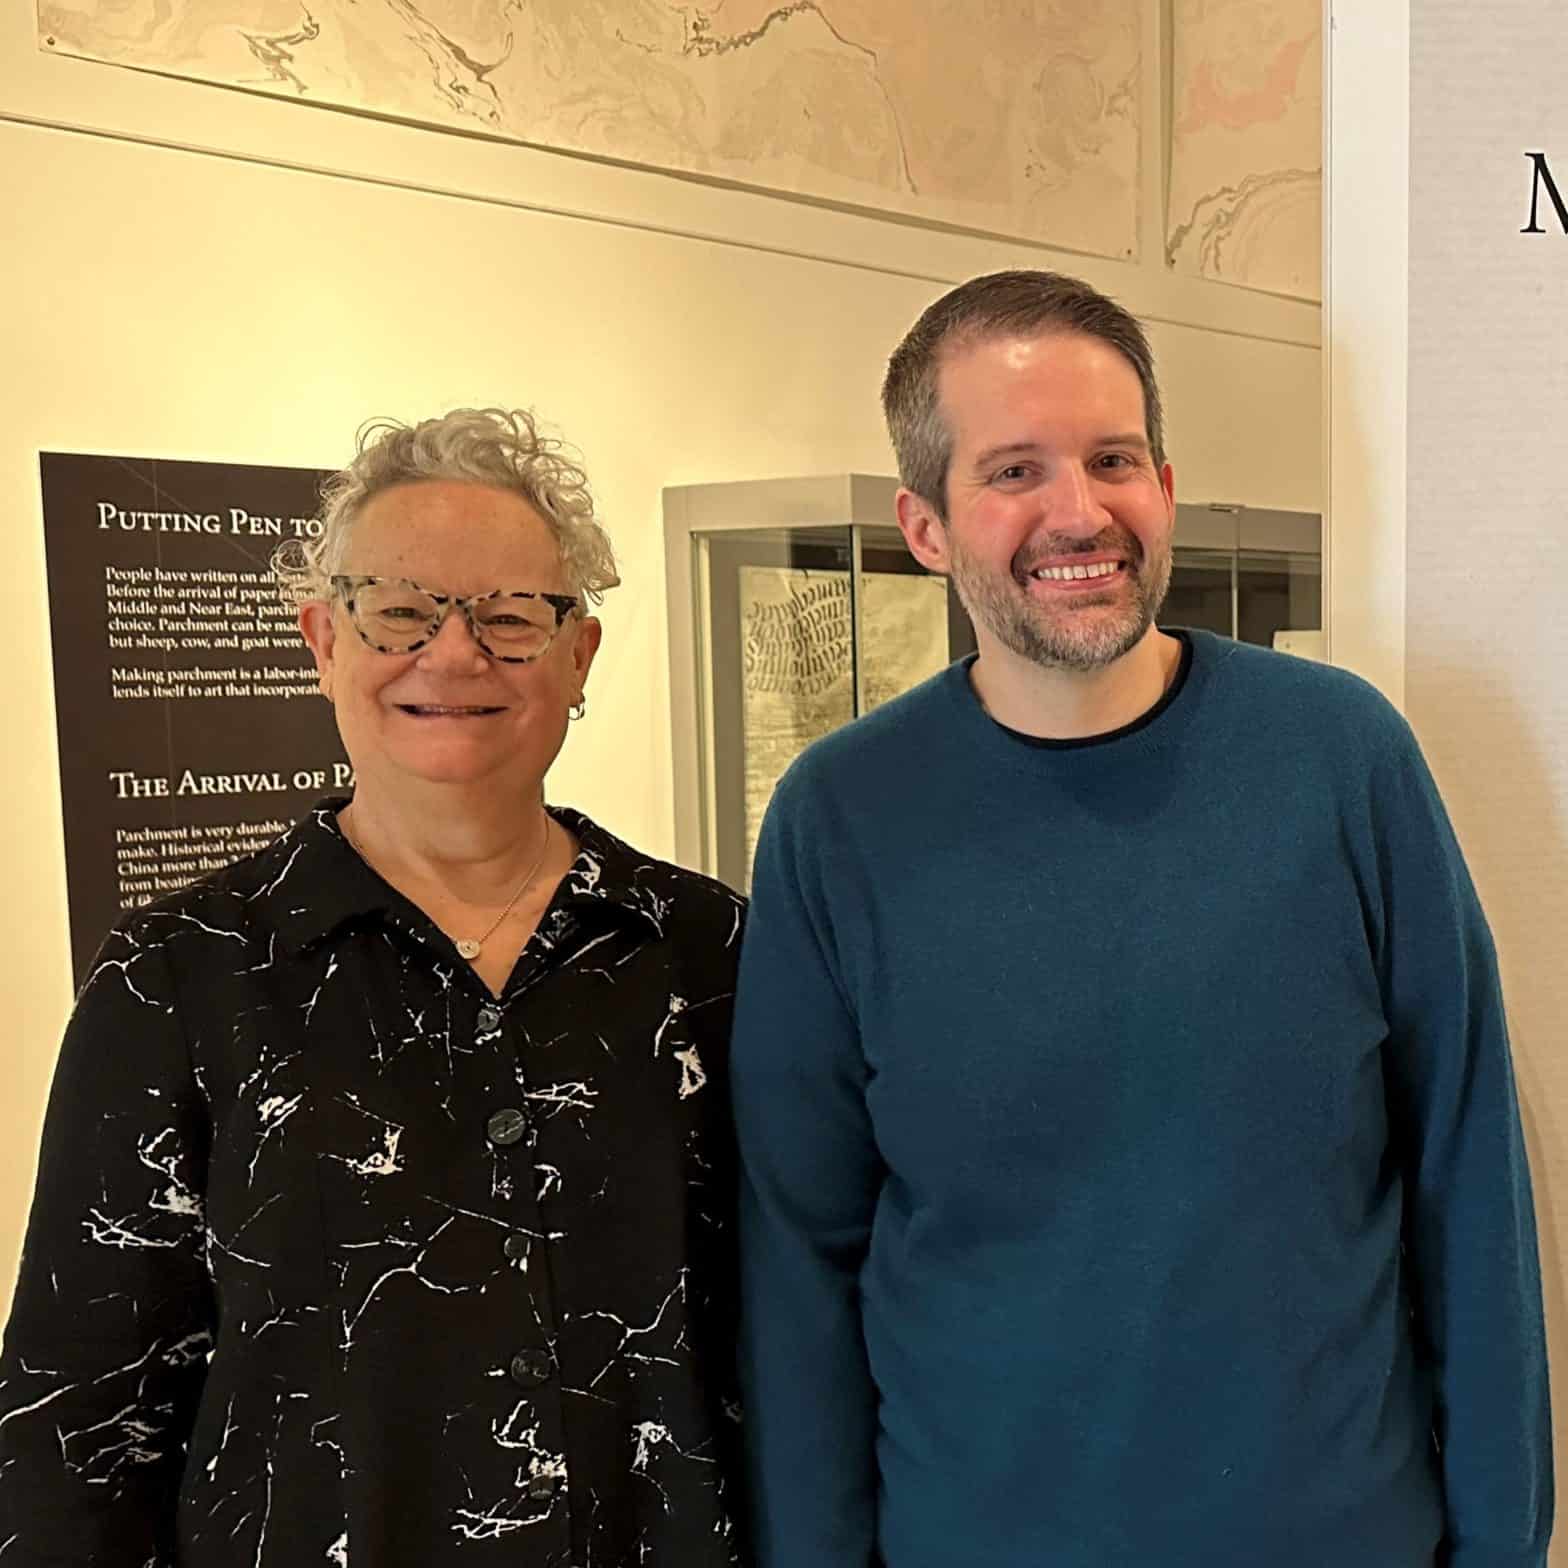 Two people, the exhibit curators, stand in front of a sign that says Making the Book Past and Present, curated by Eric Ensley and Emily Martin, 2024. Emily is a 70-something artist with short gray hair and wears black glasses and a black shirt. Eric is a 30-something librarian with short brown hair and wears a teal sweater. They are both smiling.